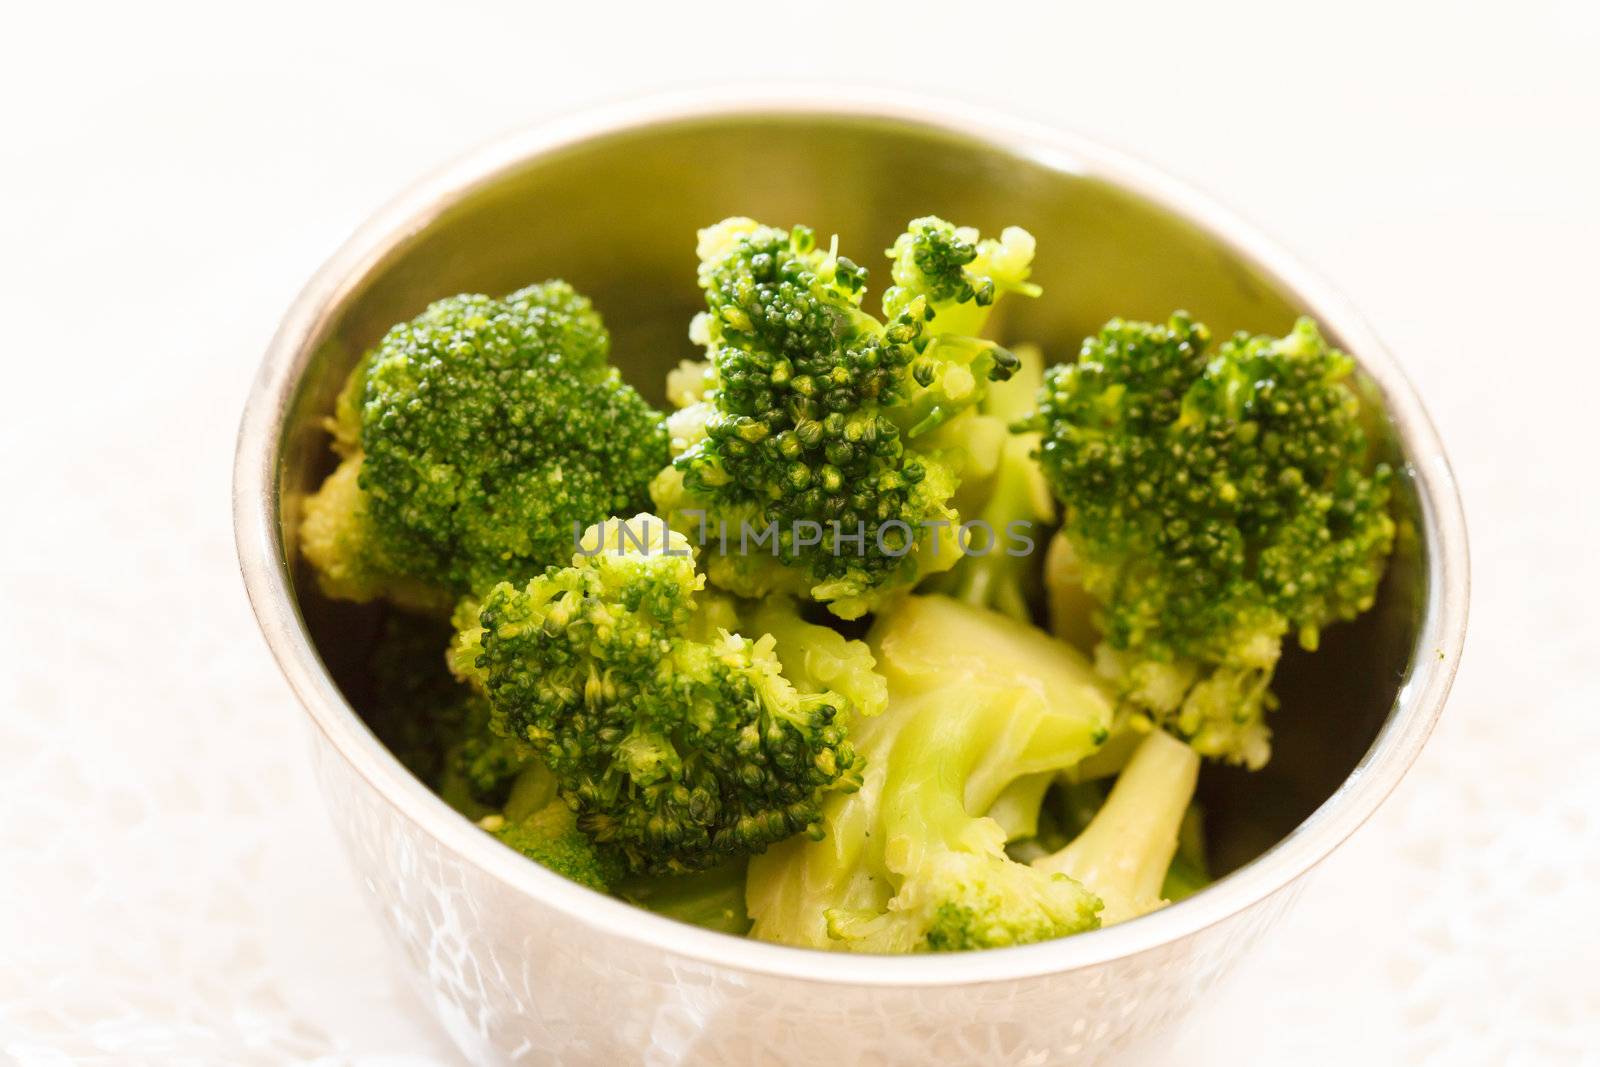 Steamed broccoli in a bowl 